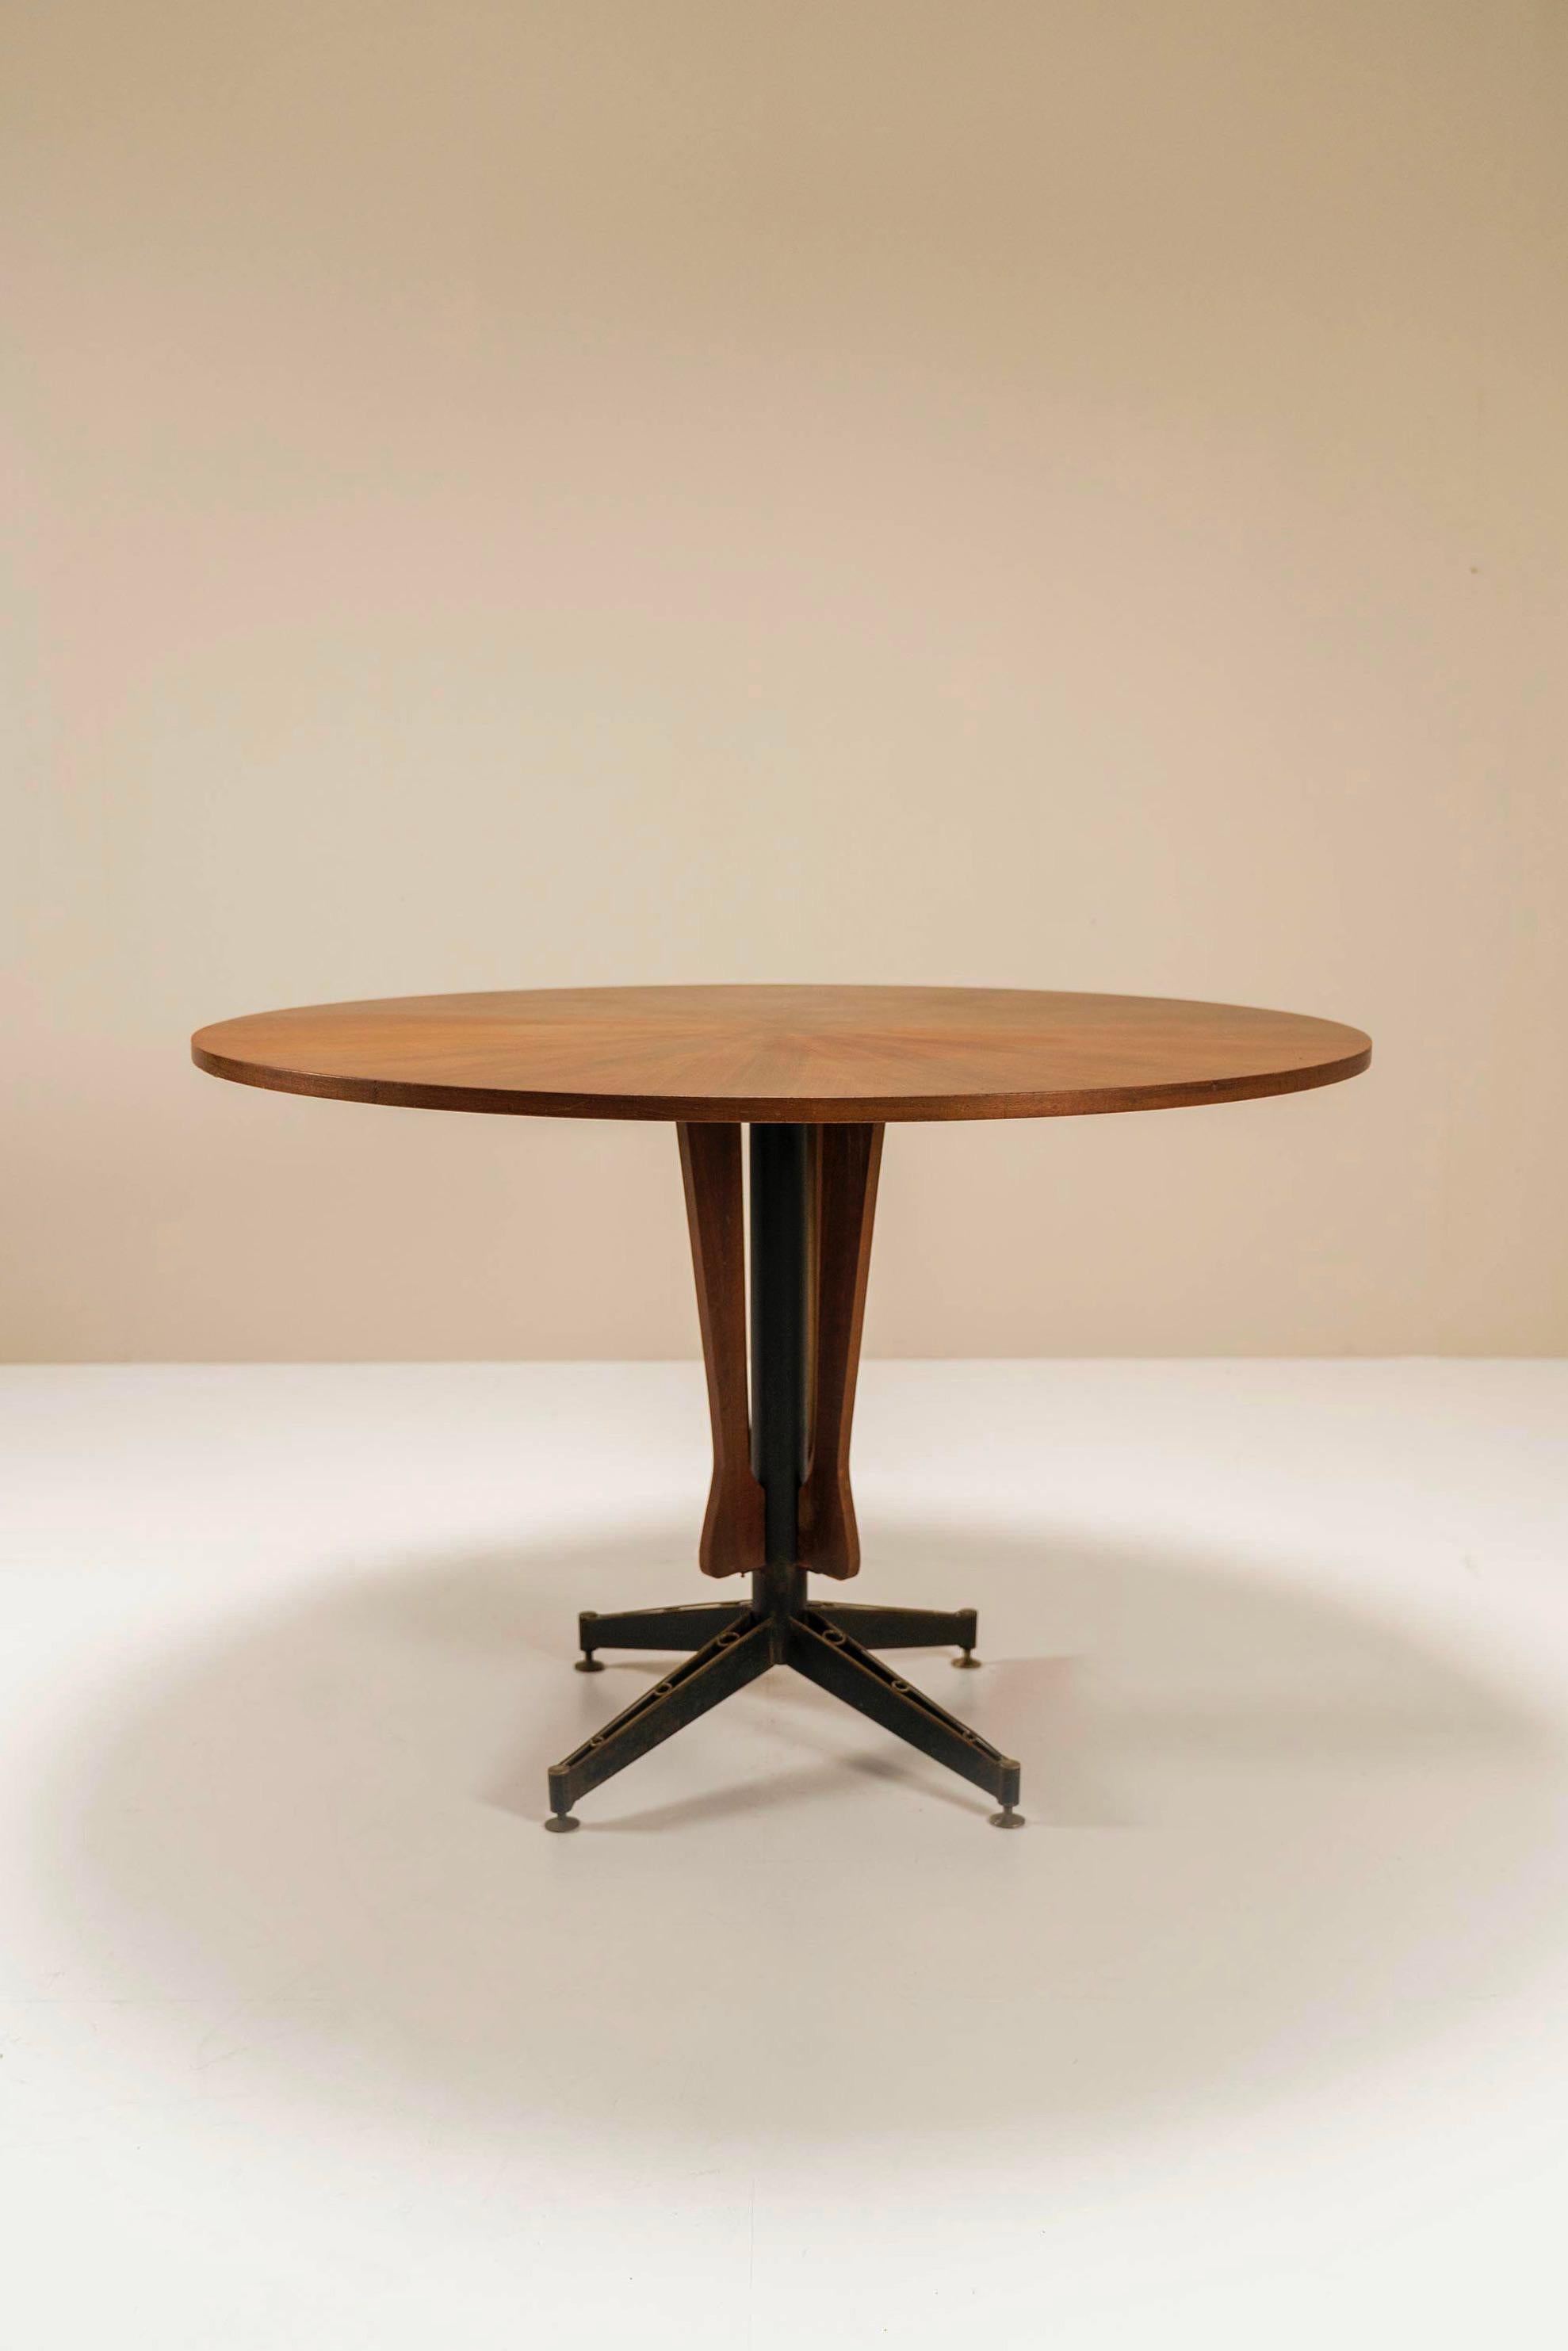 This very refined dining table was designed during the 1950s by Carlo Ratti and manufactured by the late Italian furniture company Lissoni. Let's start with the legs. The brass feet are each adjustable in height with a margin of about one and a half